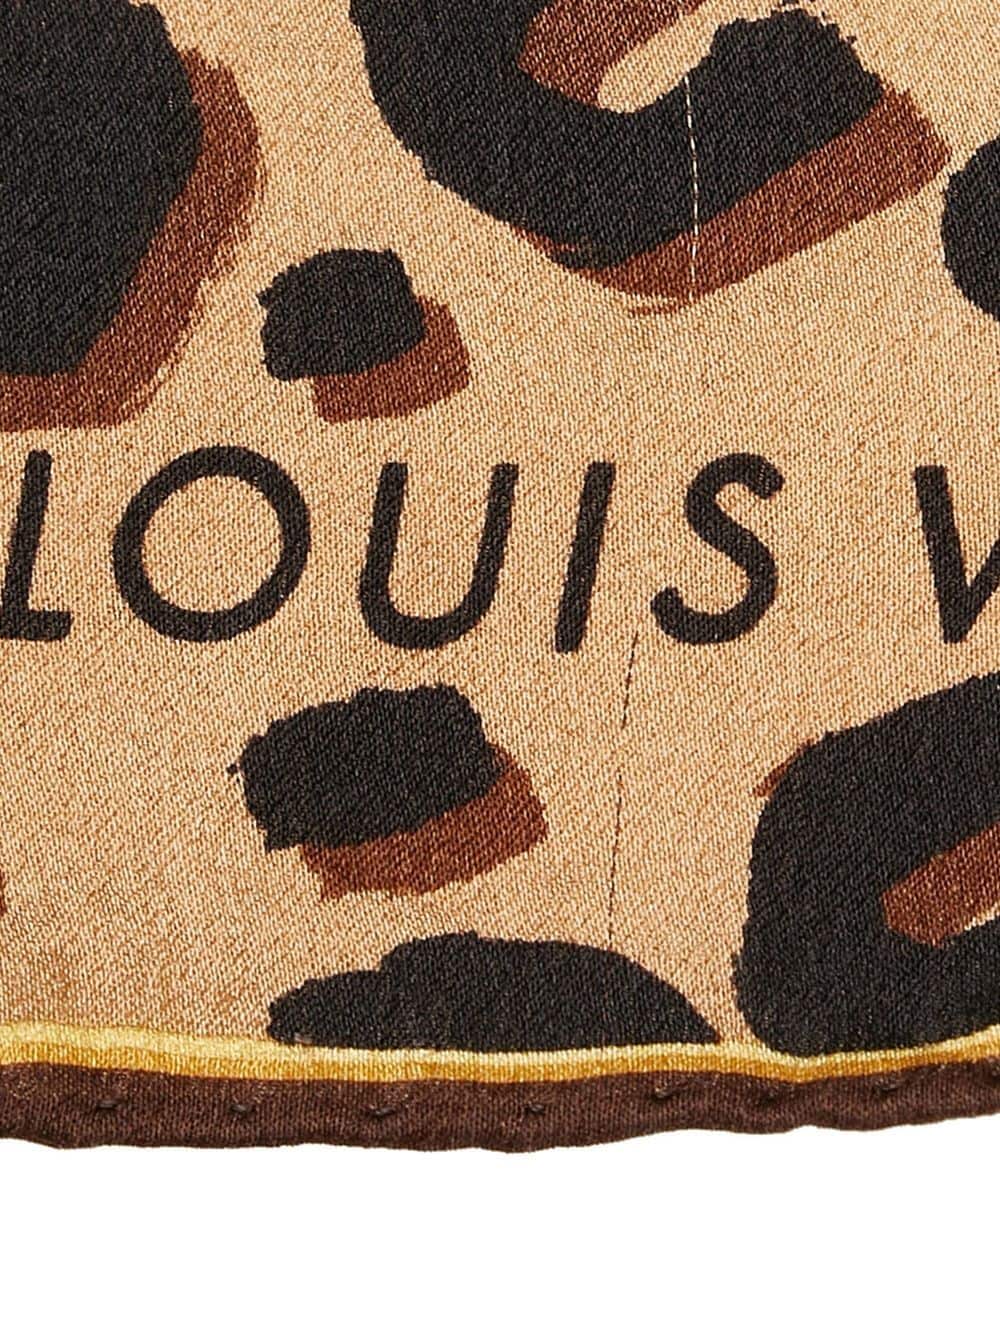 Louis Vuitton M72124 Silk Scarf Carre Monogram Leopard Brown Used from Japan